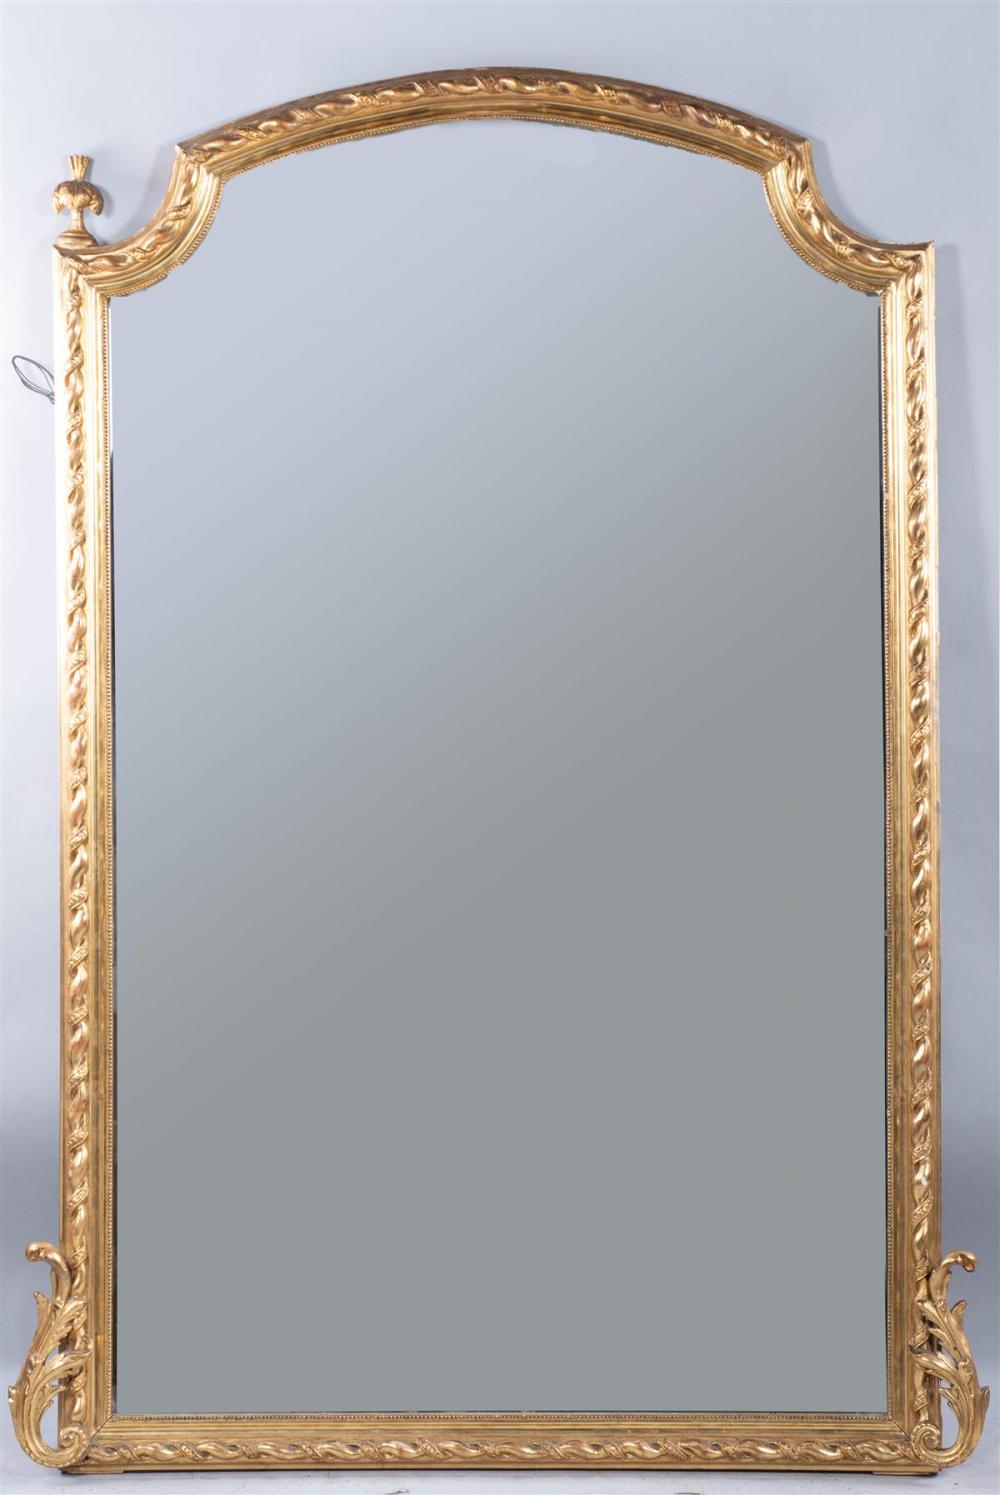 FRENCH GILTWOOD OVERMANTEL MIRROR  33ad4f